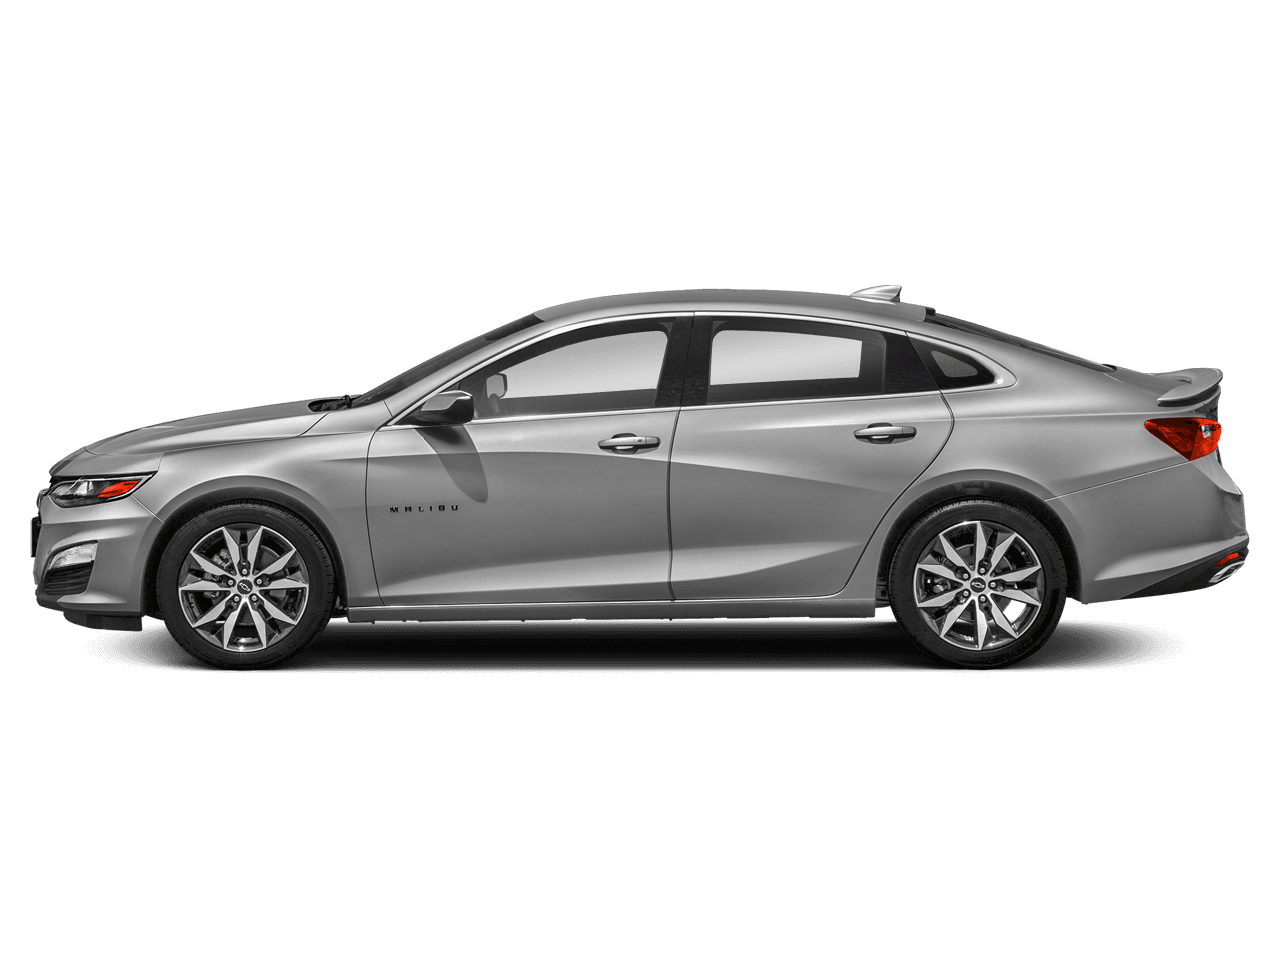 2020 Chevrolet Malibu Photo in Wooster, OH 44691